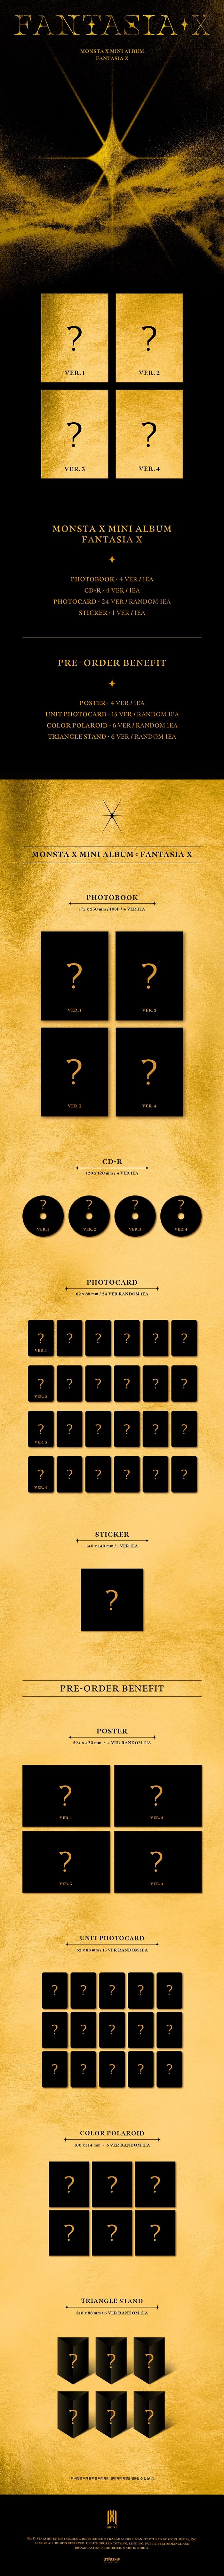 1 CD
1 Photo Book (108 pages)
1 Card
1 Sticker